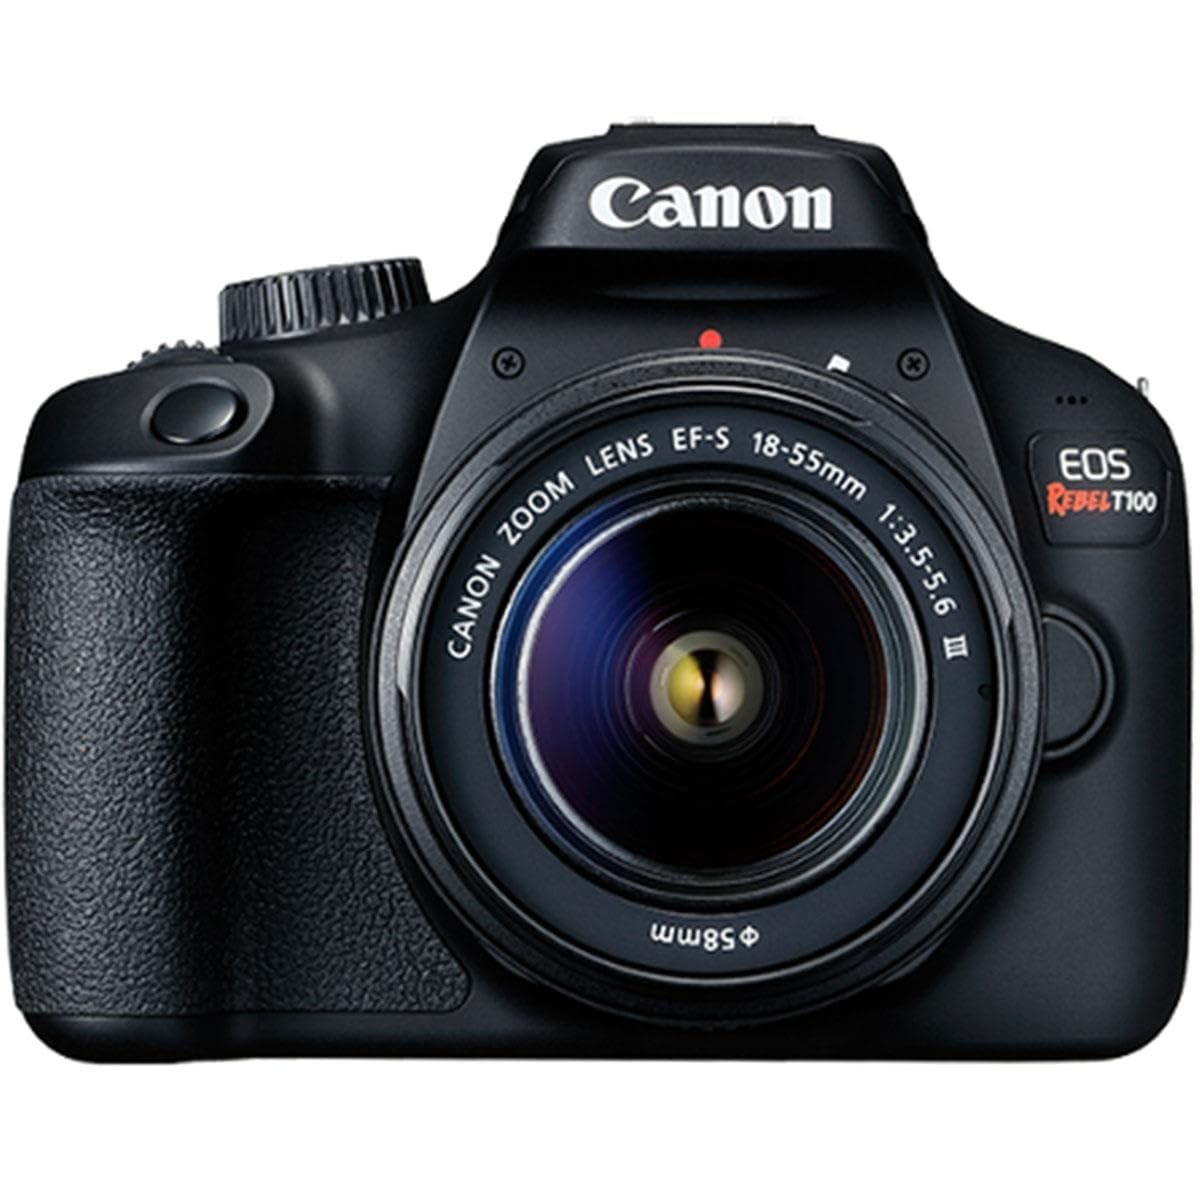 Canon EOS Rebel T100 Camera with EF-S 18-55mm f/3.5-5.6 is II Lens, Compact DSLR Digital Camera Quality 18 MP Photos & Full HD Videos, Full Frame Sensor Size (New)